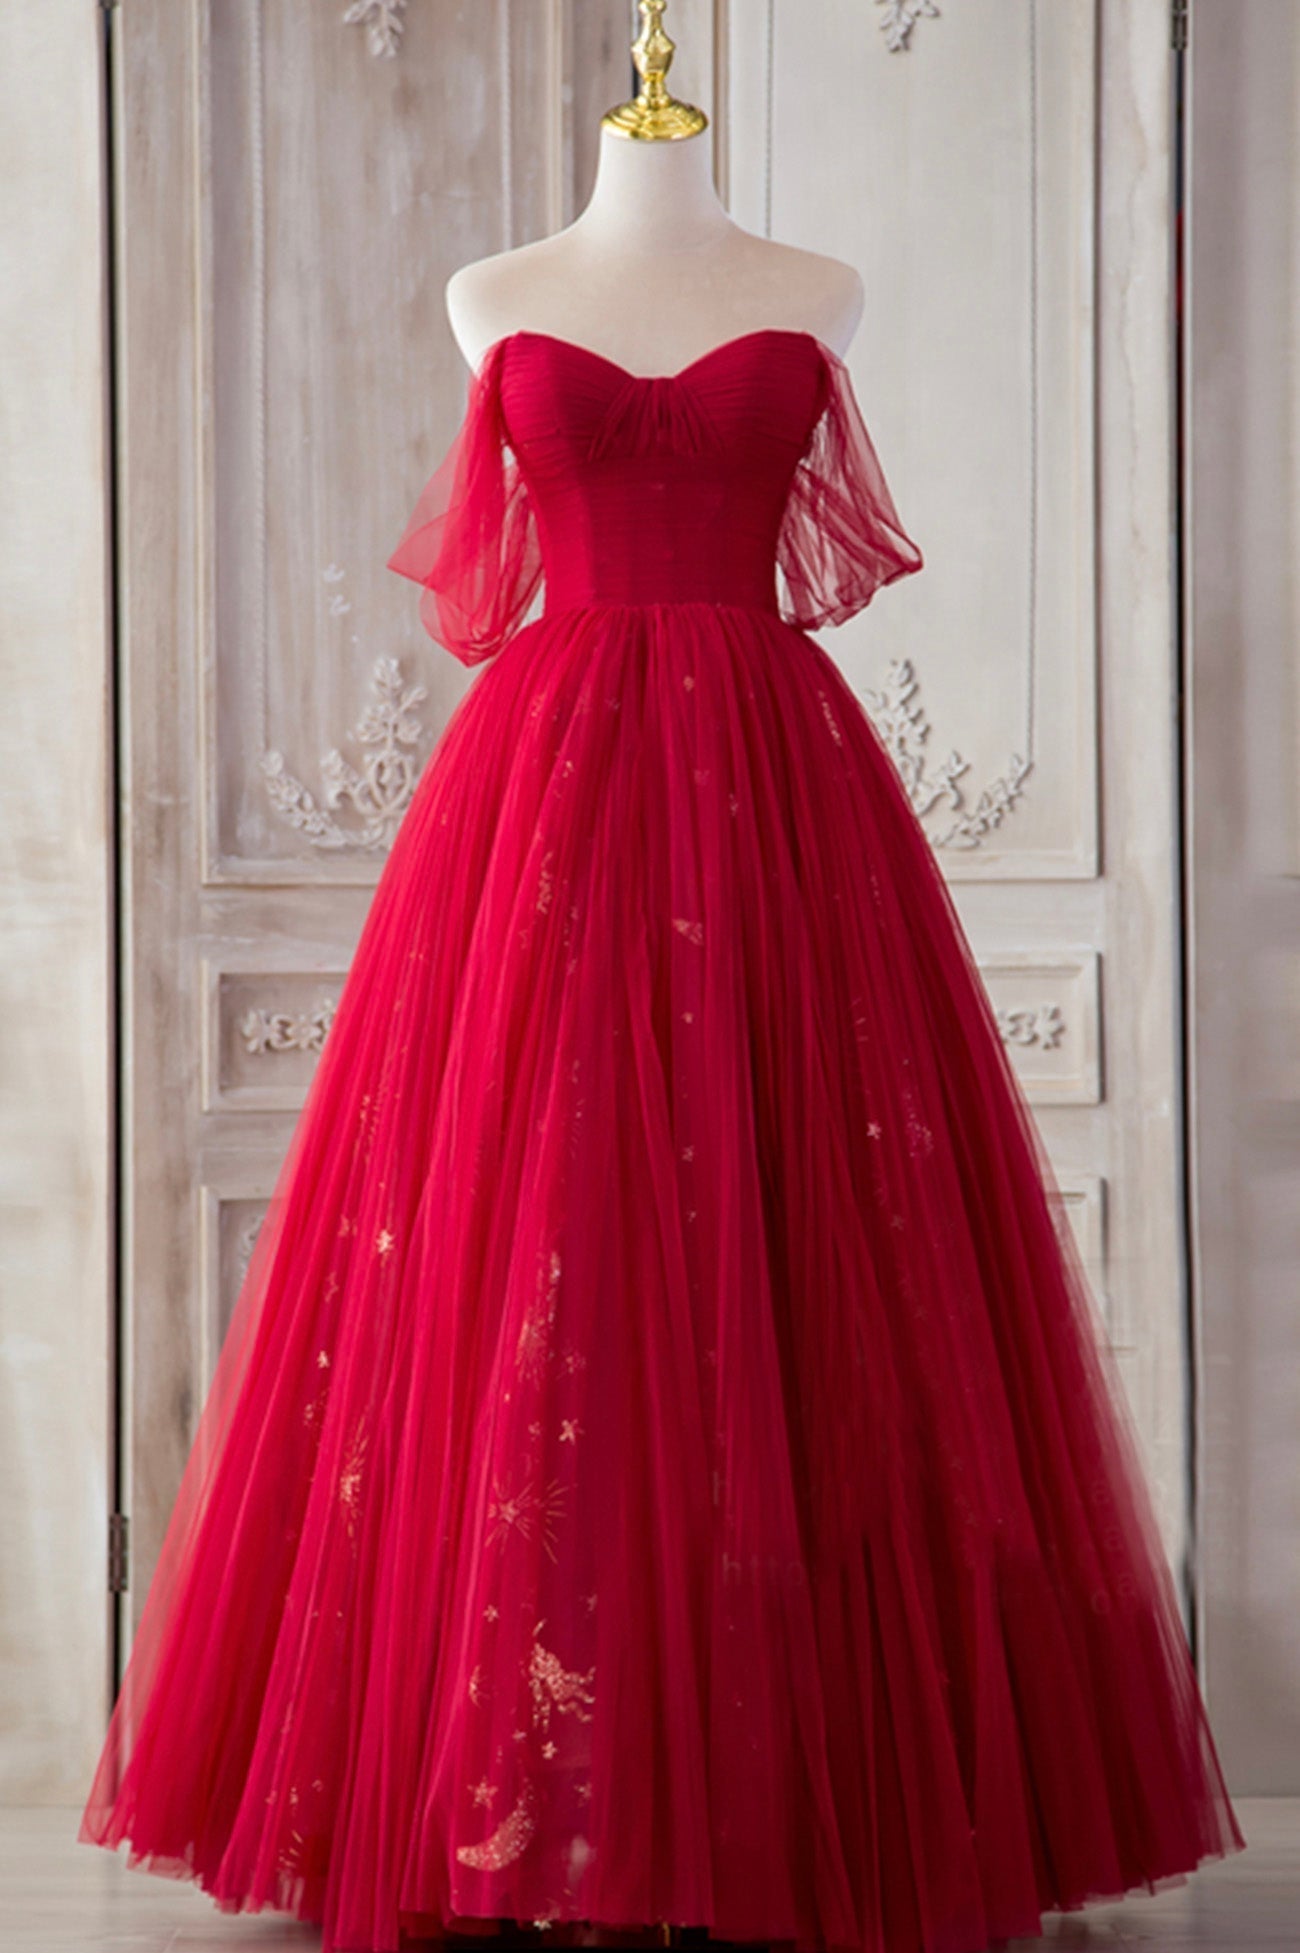 The Red Strapless Tulle Long A-Line Corset Prom Dress is a showstopper. With its off-the-shoulder design and A-line silhouette, it perfectly blends elegance and allure. outfit, Prom Dresse Backless